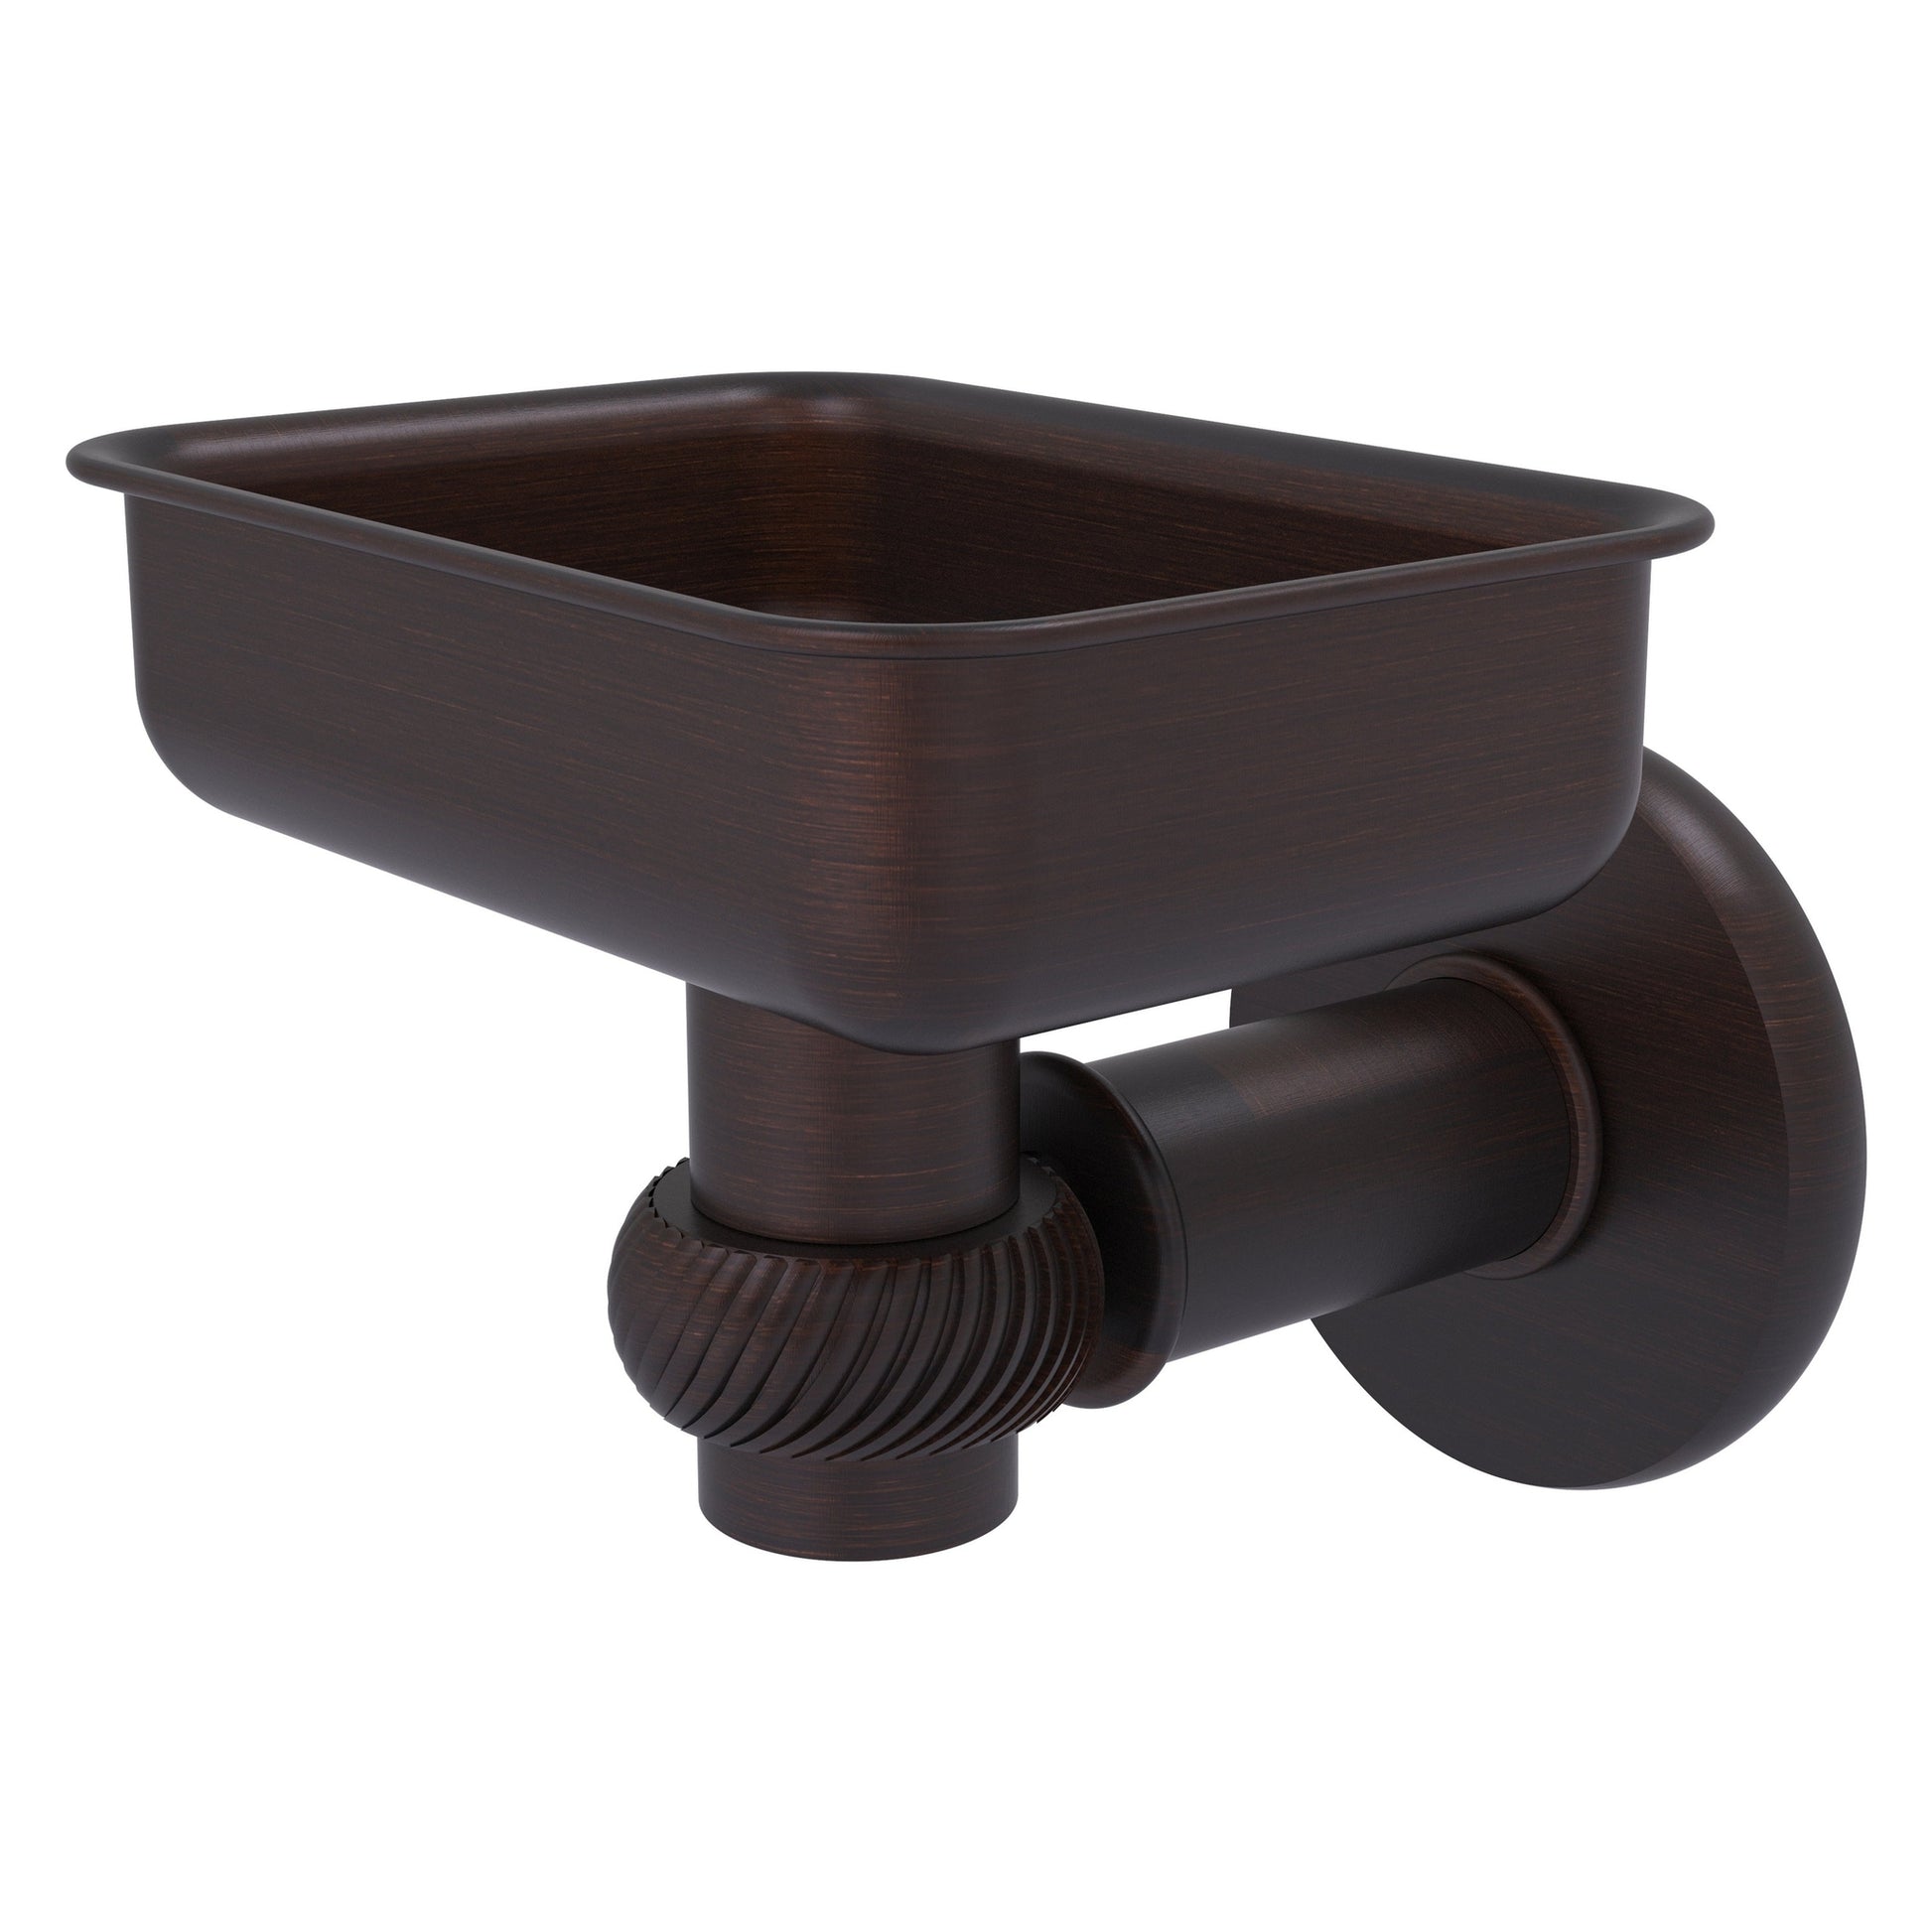 Allied Brass Continental 4.5" x 3.5" Venetian Bronze Solid Brass Wall-Mounted Soap Dish Holder with Twist Accents